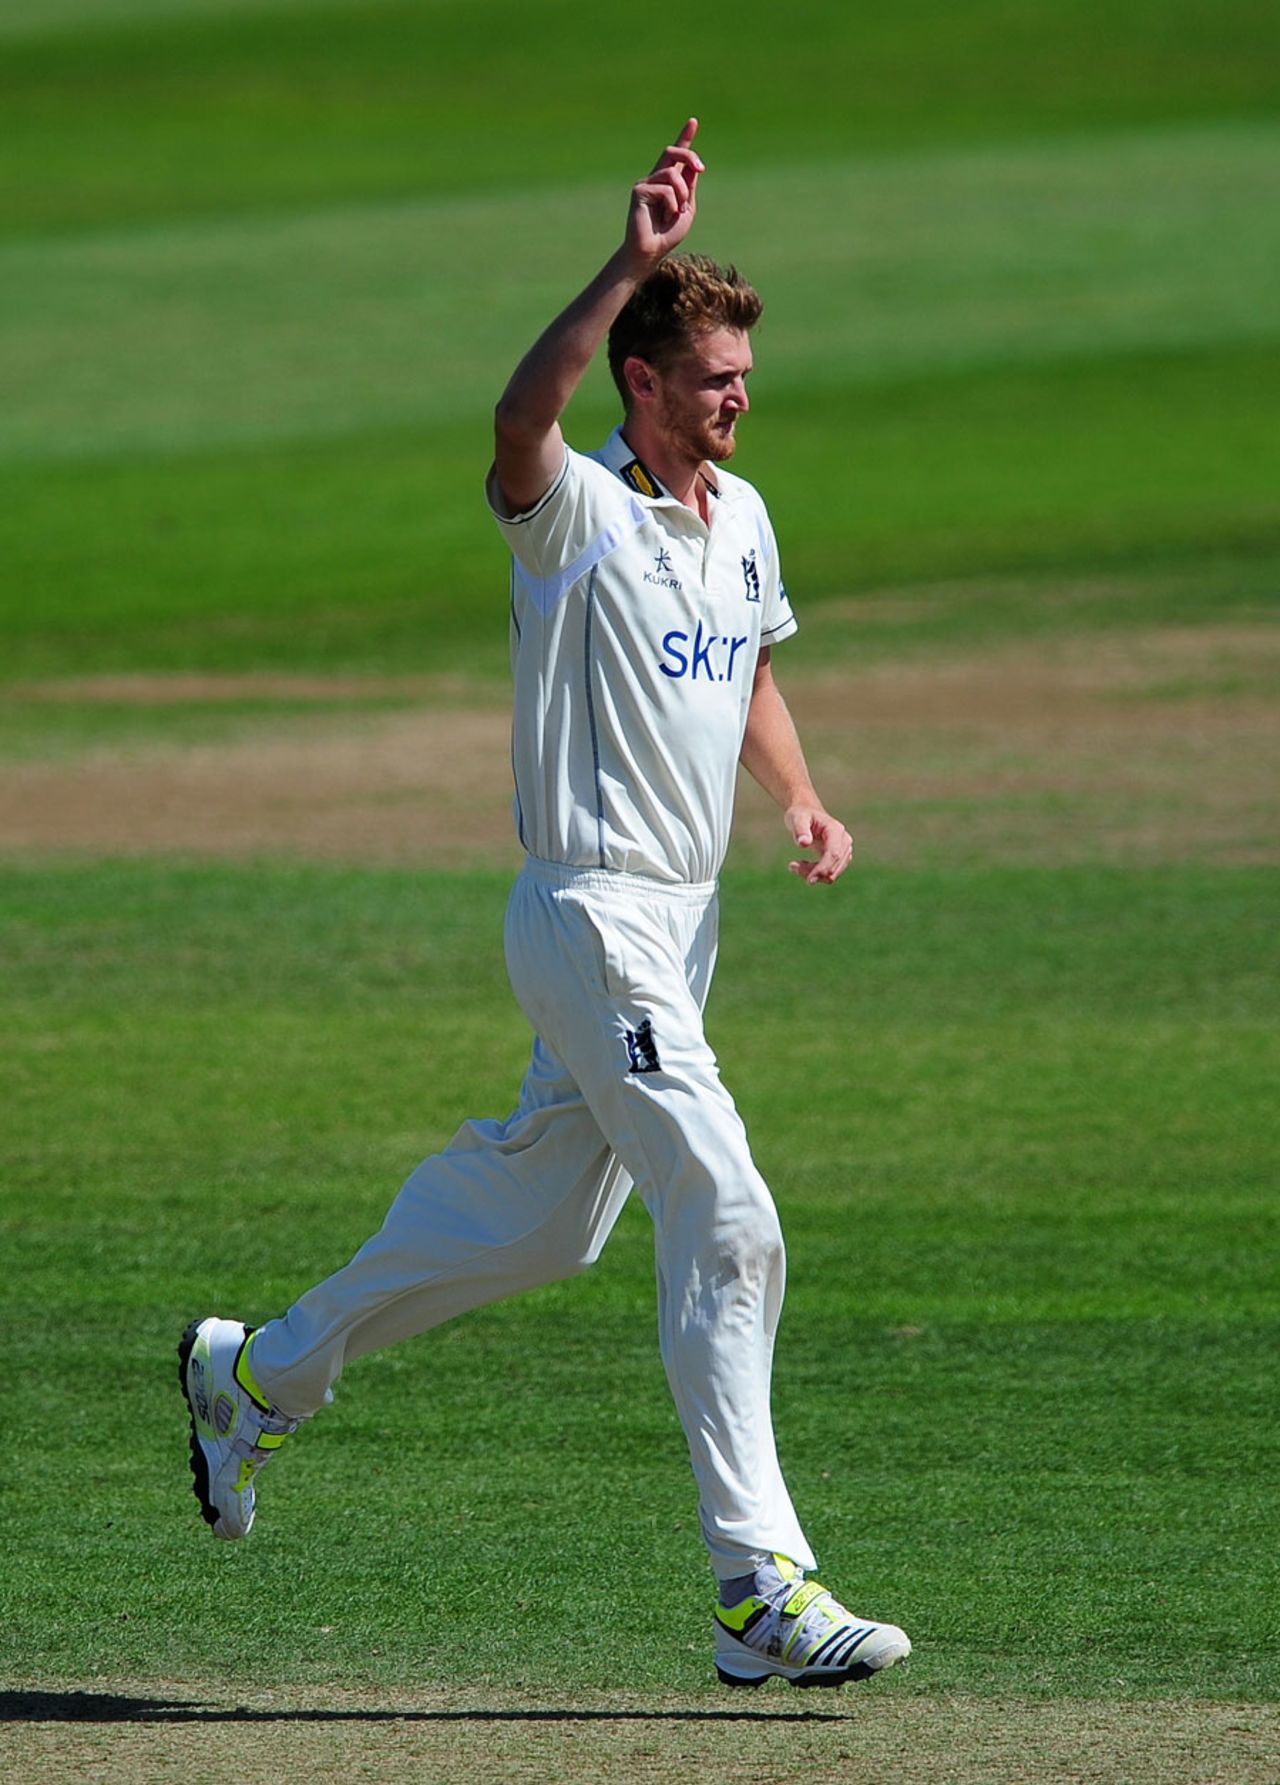 Oliver Hannon-Dalby celebrates a wicket, Somerset v Warwickshire, County Championship, Division One, 4th day, Taunton, August 18, 2014